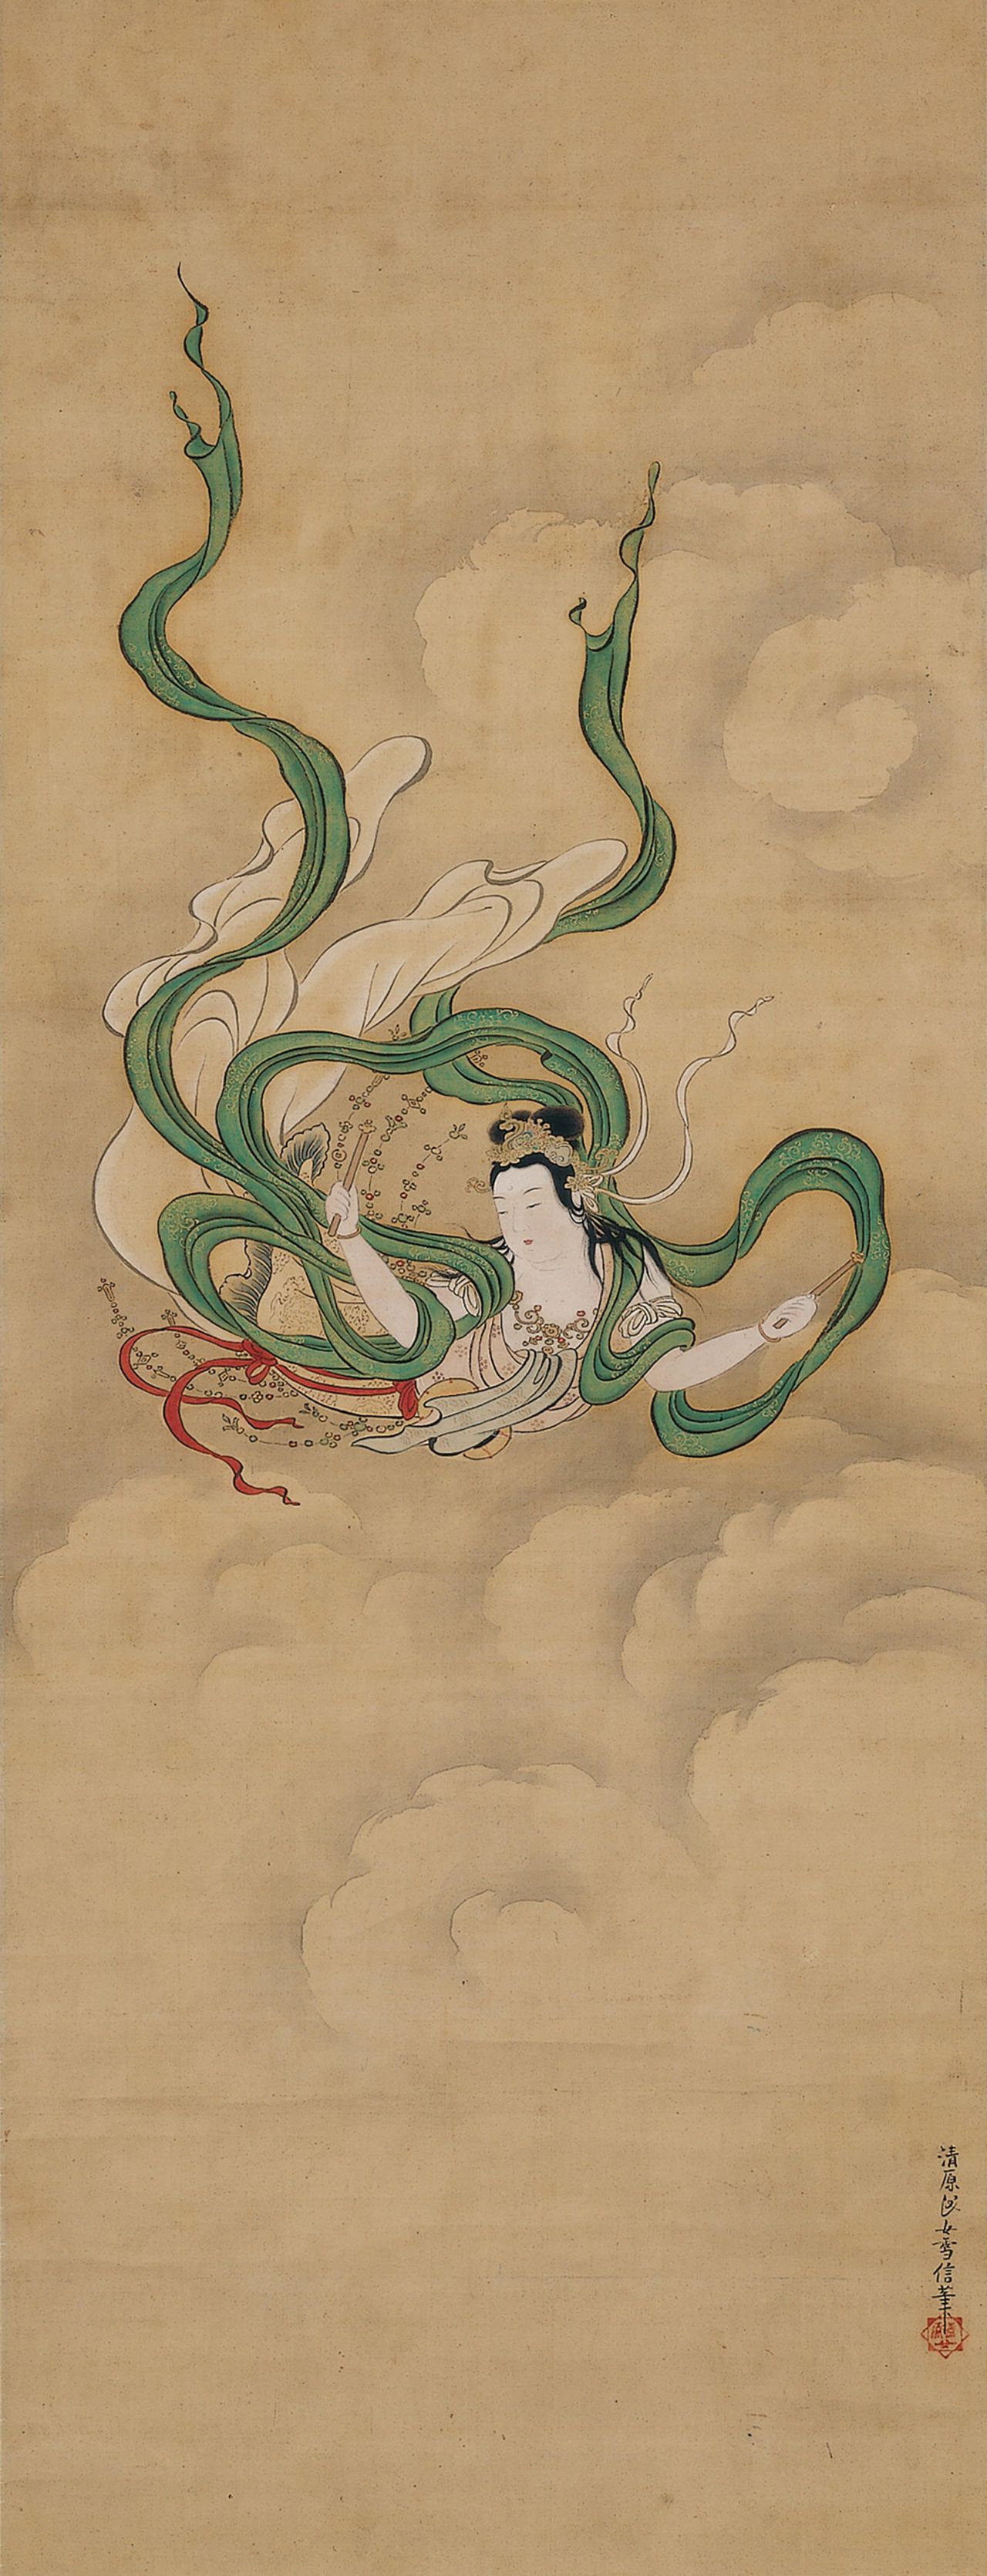 MP3JC9 Kiyohara Yukinobu, Japanese, 1643 - 1682; Flying Celestial (Apsaras); second half 17th century; Hanging scroll; Ink, color, and gold on silk; 45 7/8 × 17 5/8 in. (116.52 × 44.77 cm) (image)77 5/16 × 22 1/4 in. (196.37 × 56.52 cm) (mount, without roller); Minneapolis Institute of Art; Mary Griggs Burke Collection, Gift of the Mary and Jackson Burke Foundation; L2015.33.70 KiyoharaYukinobu FlyingCelestial MIA L20153370 767 KiyoharaYukinobu FlyingCelestial MIA L20153370